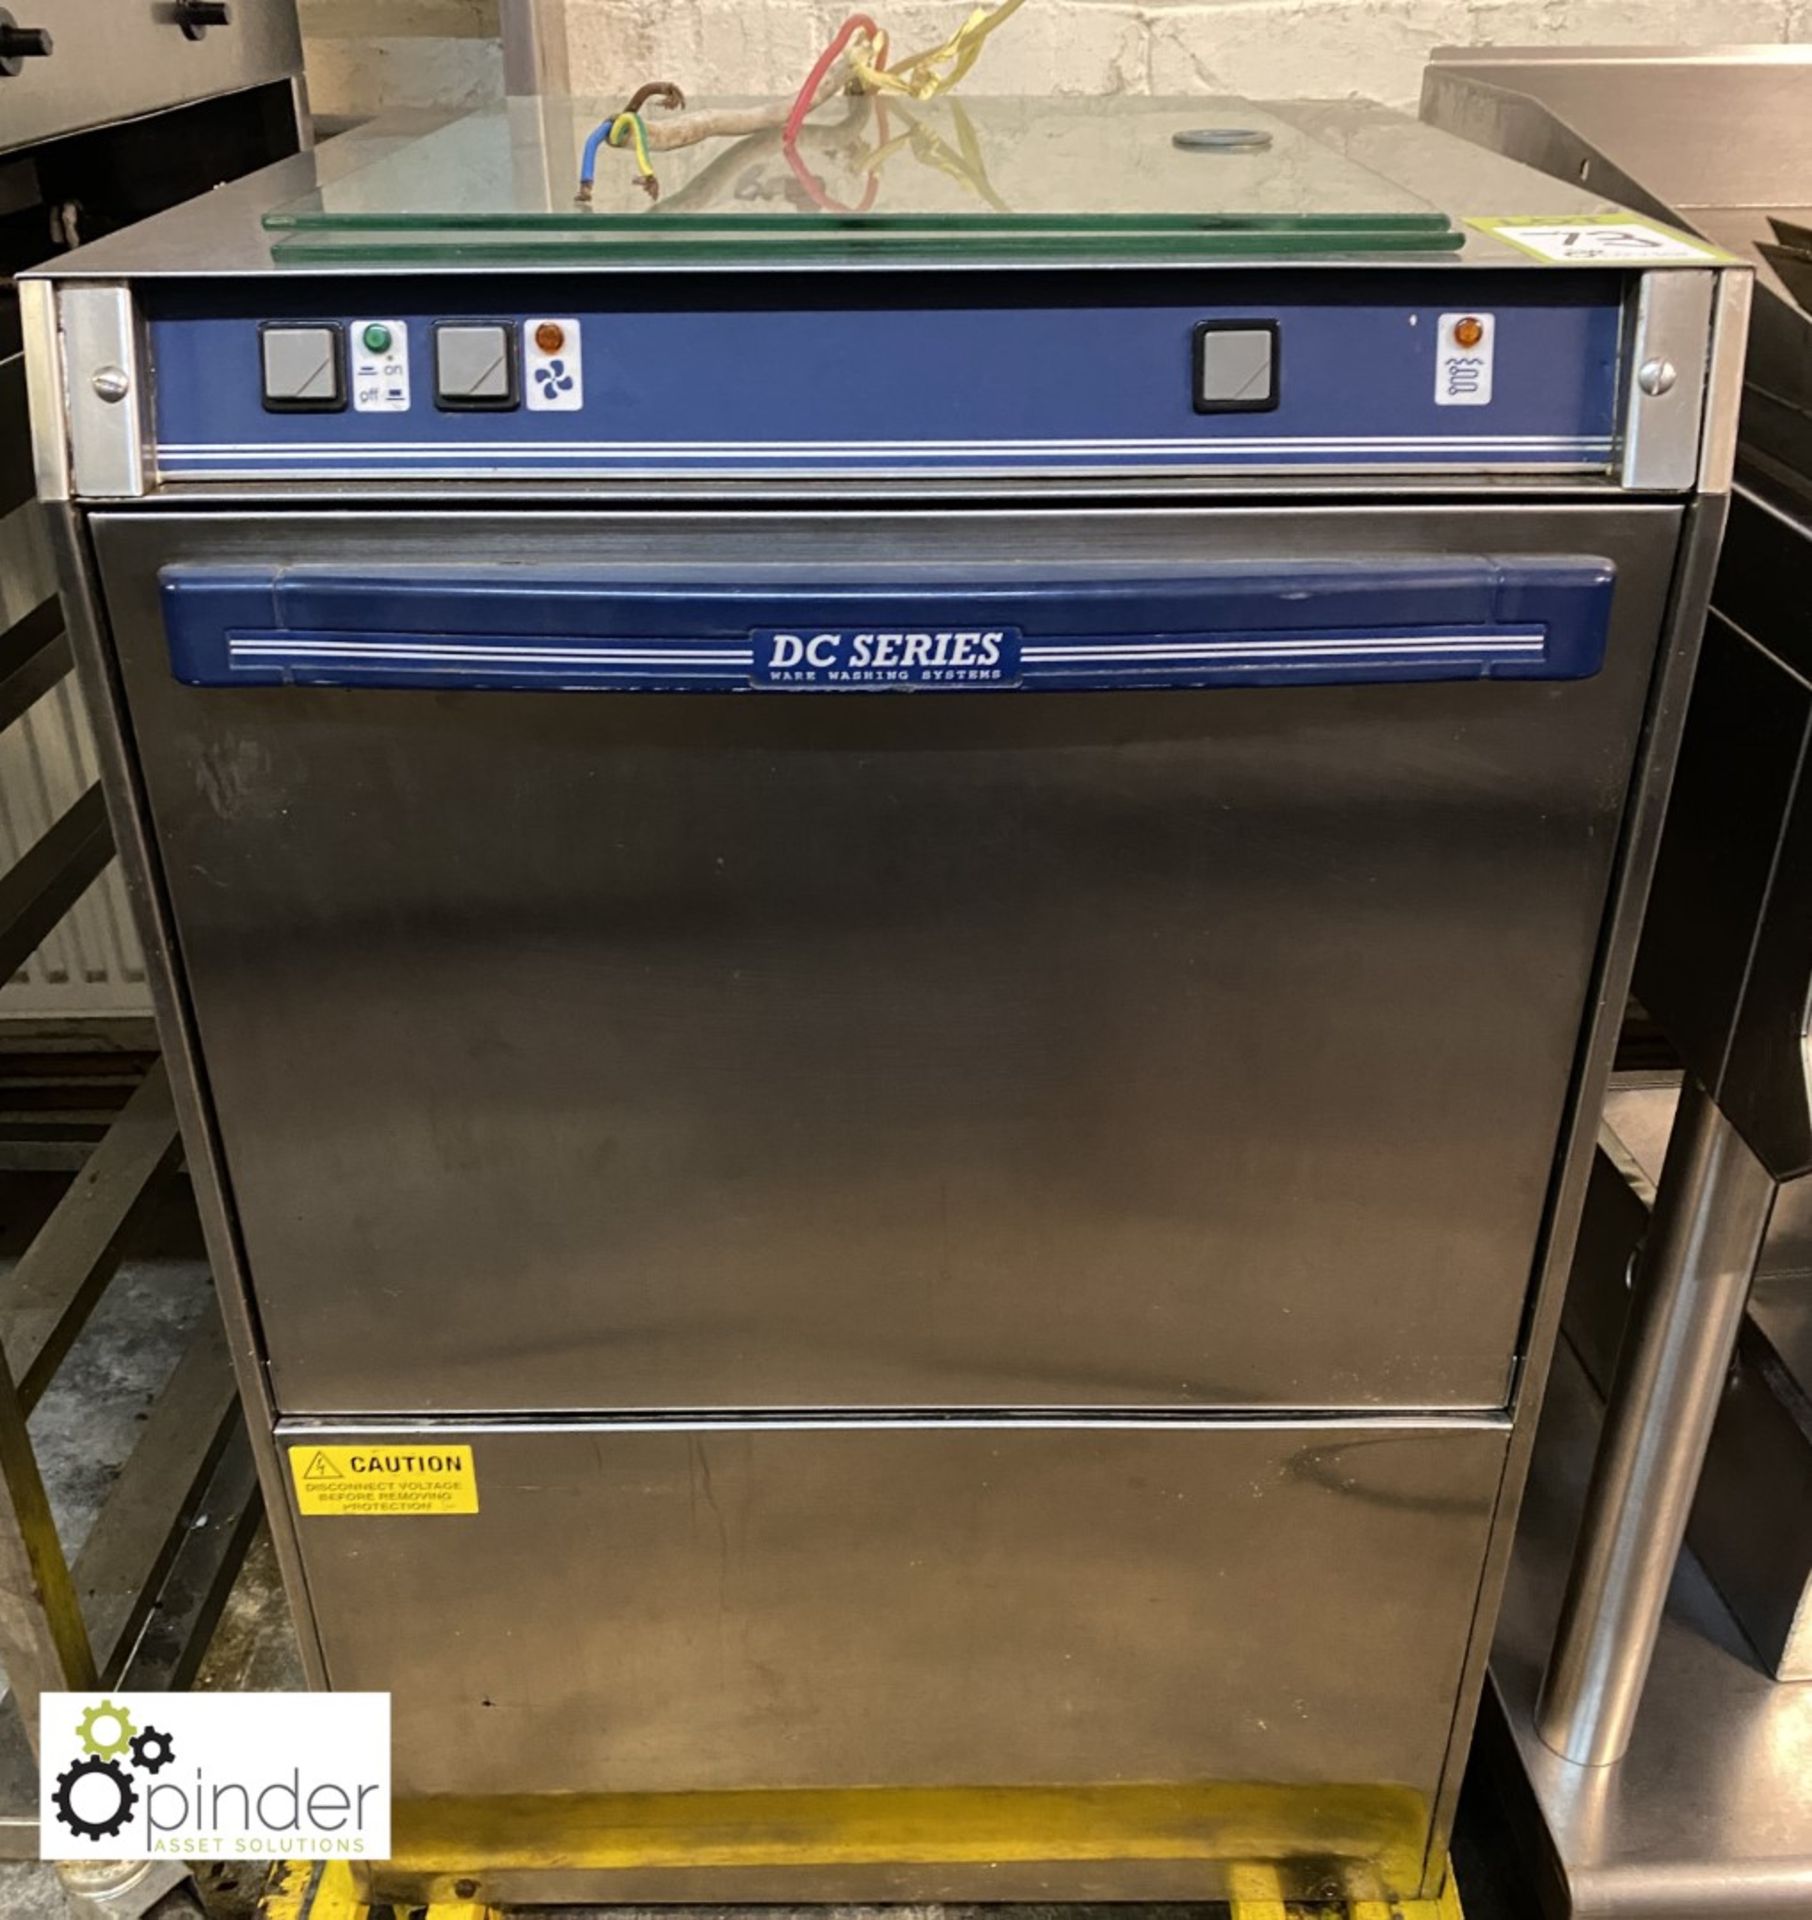 DC stainless steel commercial single tray Dishwasher, 240volts